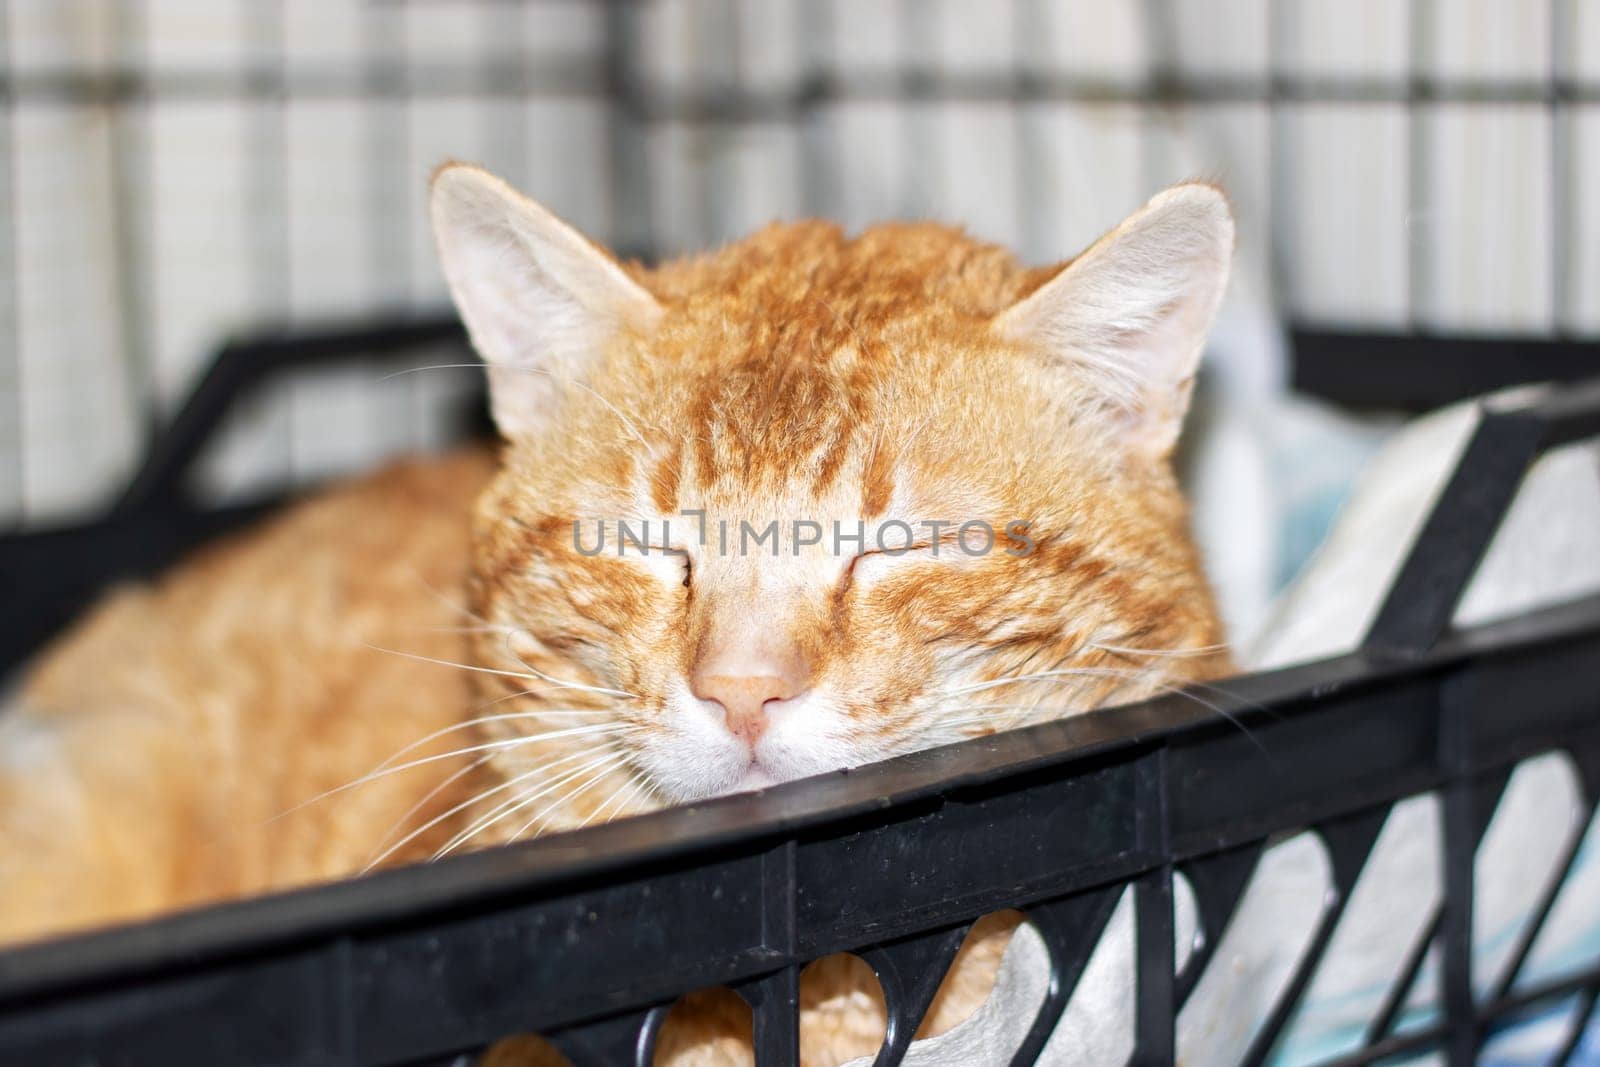 A Felidae, small to mediumsized carnivore cat with fawn fur is peacefully laying in a black basket with its eyes closed by the window, showcasing its whiskers and snout